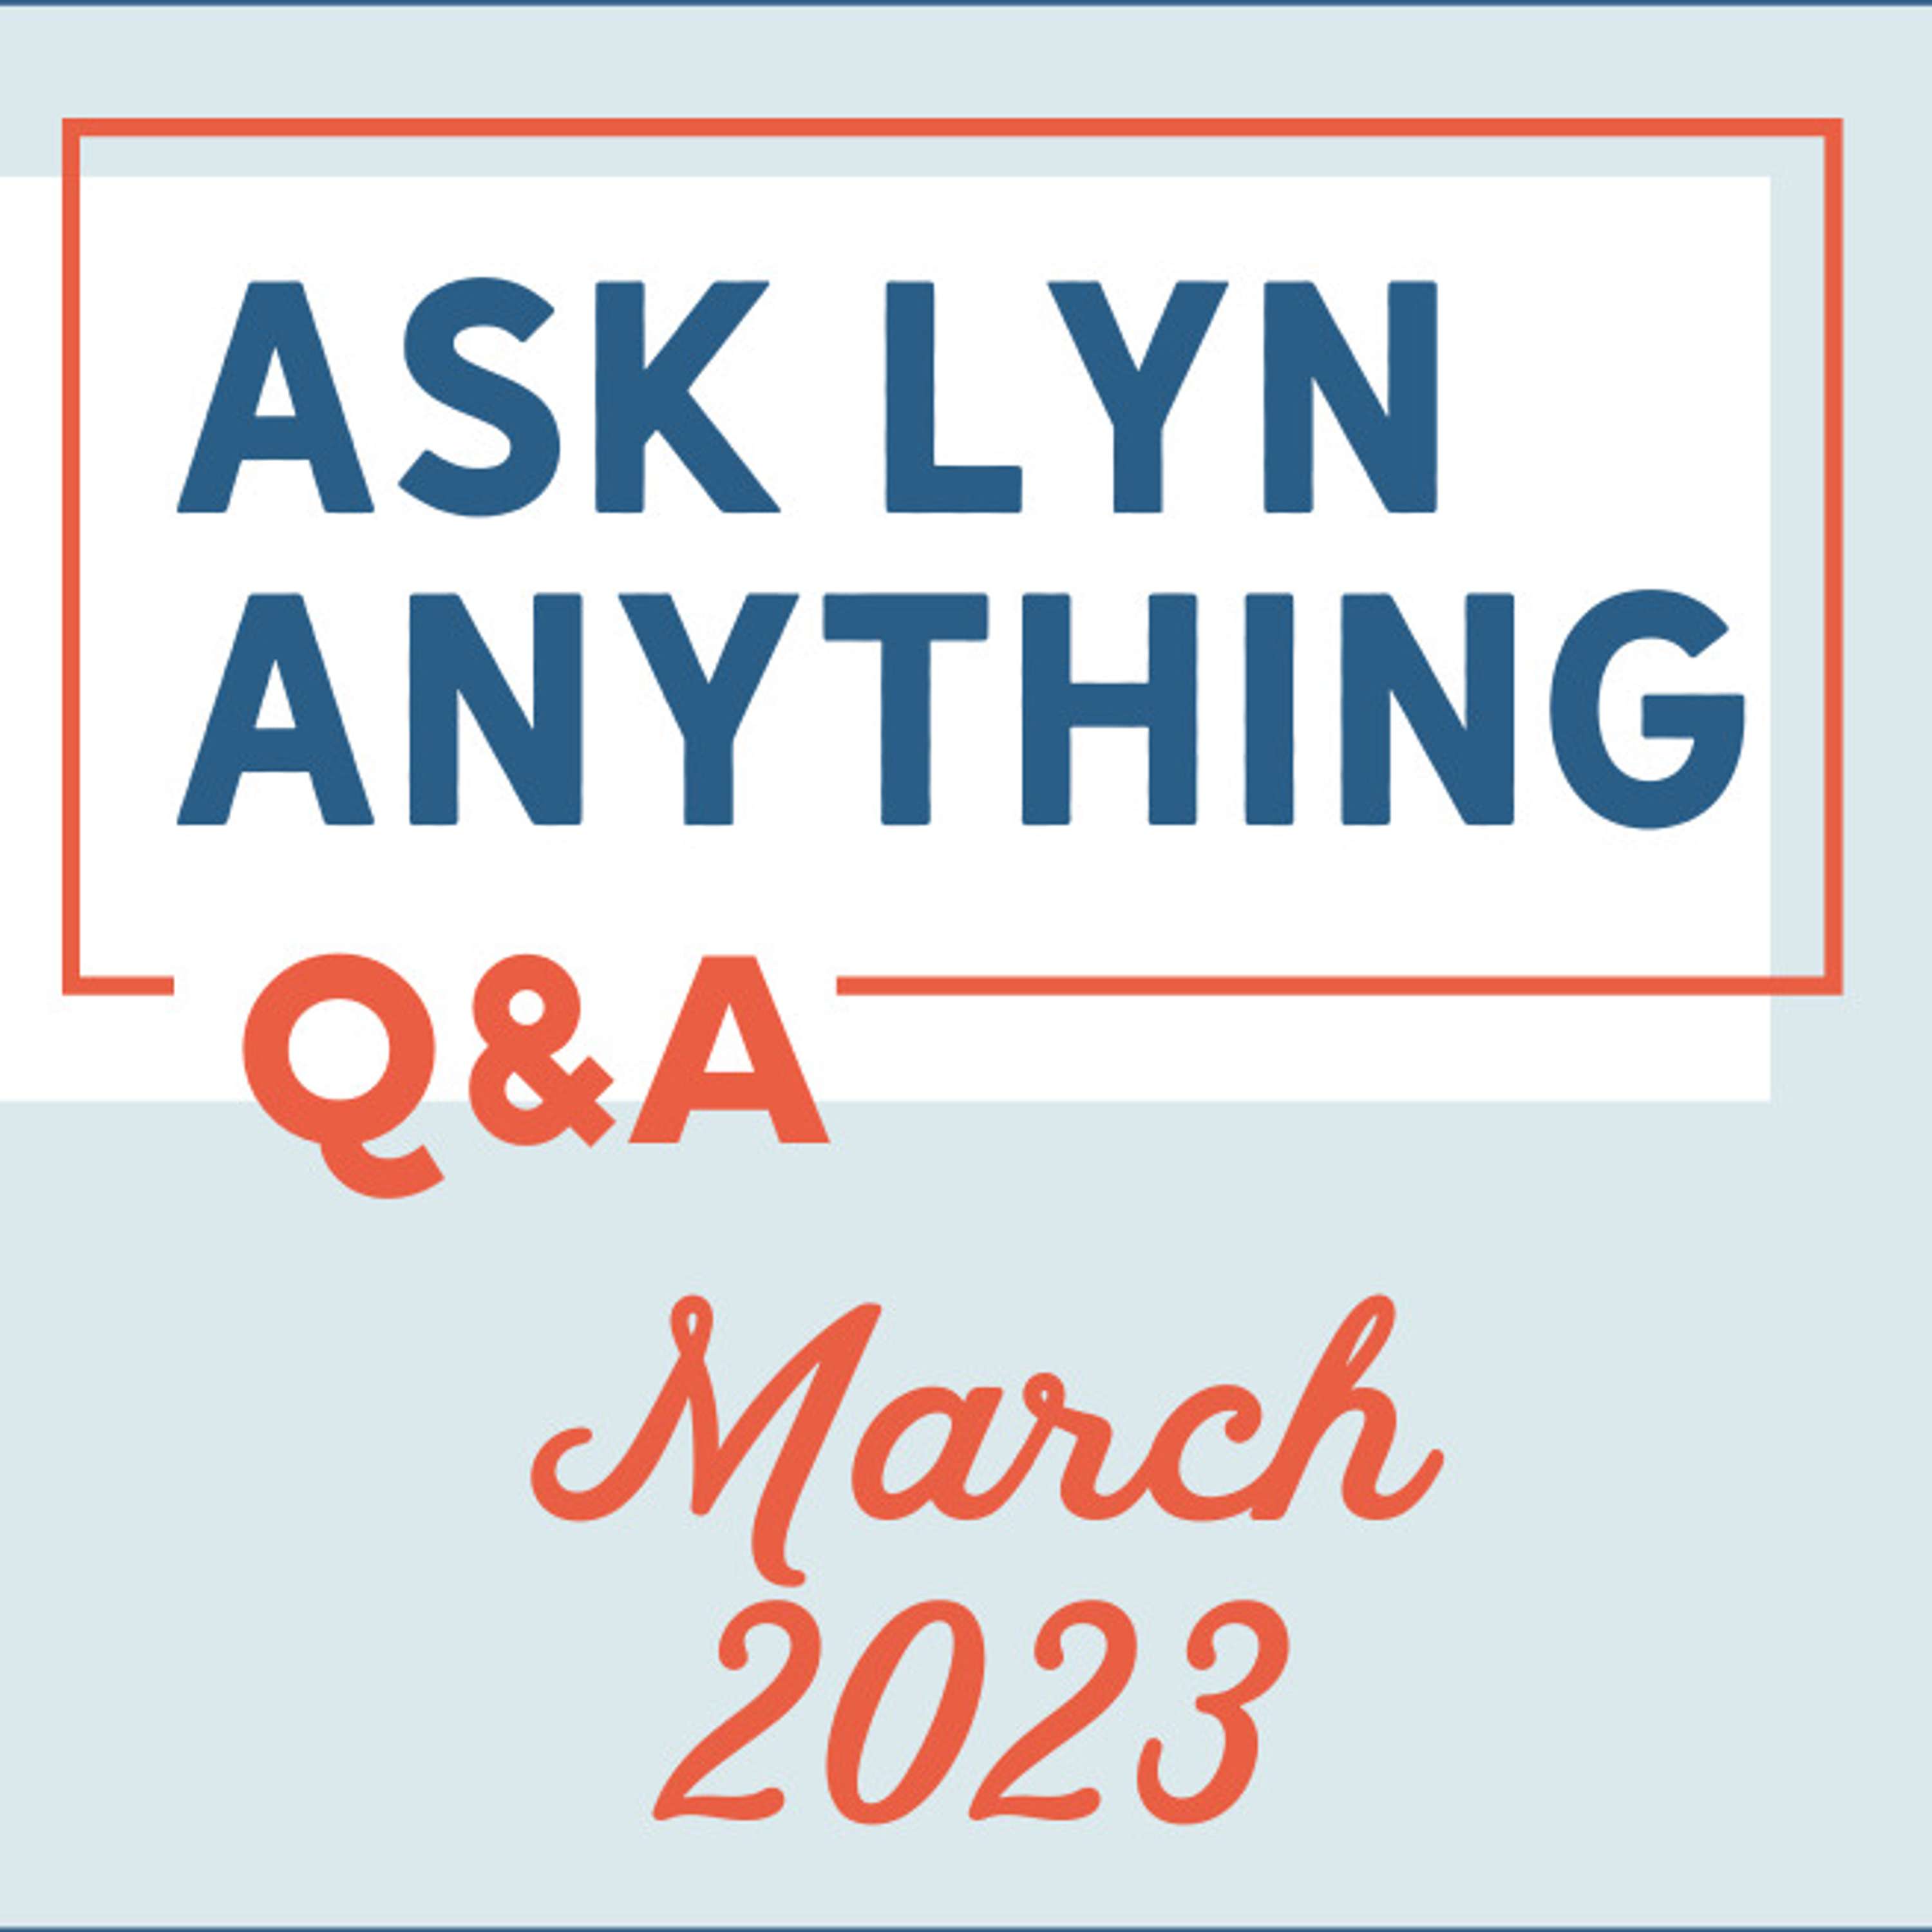 109 | Southwest Companion Pass, Capital One Venture X, Priority Pass & More in This Ask Lyn Anything Members-Only Q&A Sneak Peek